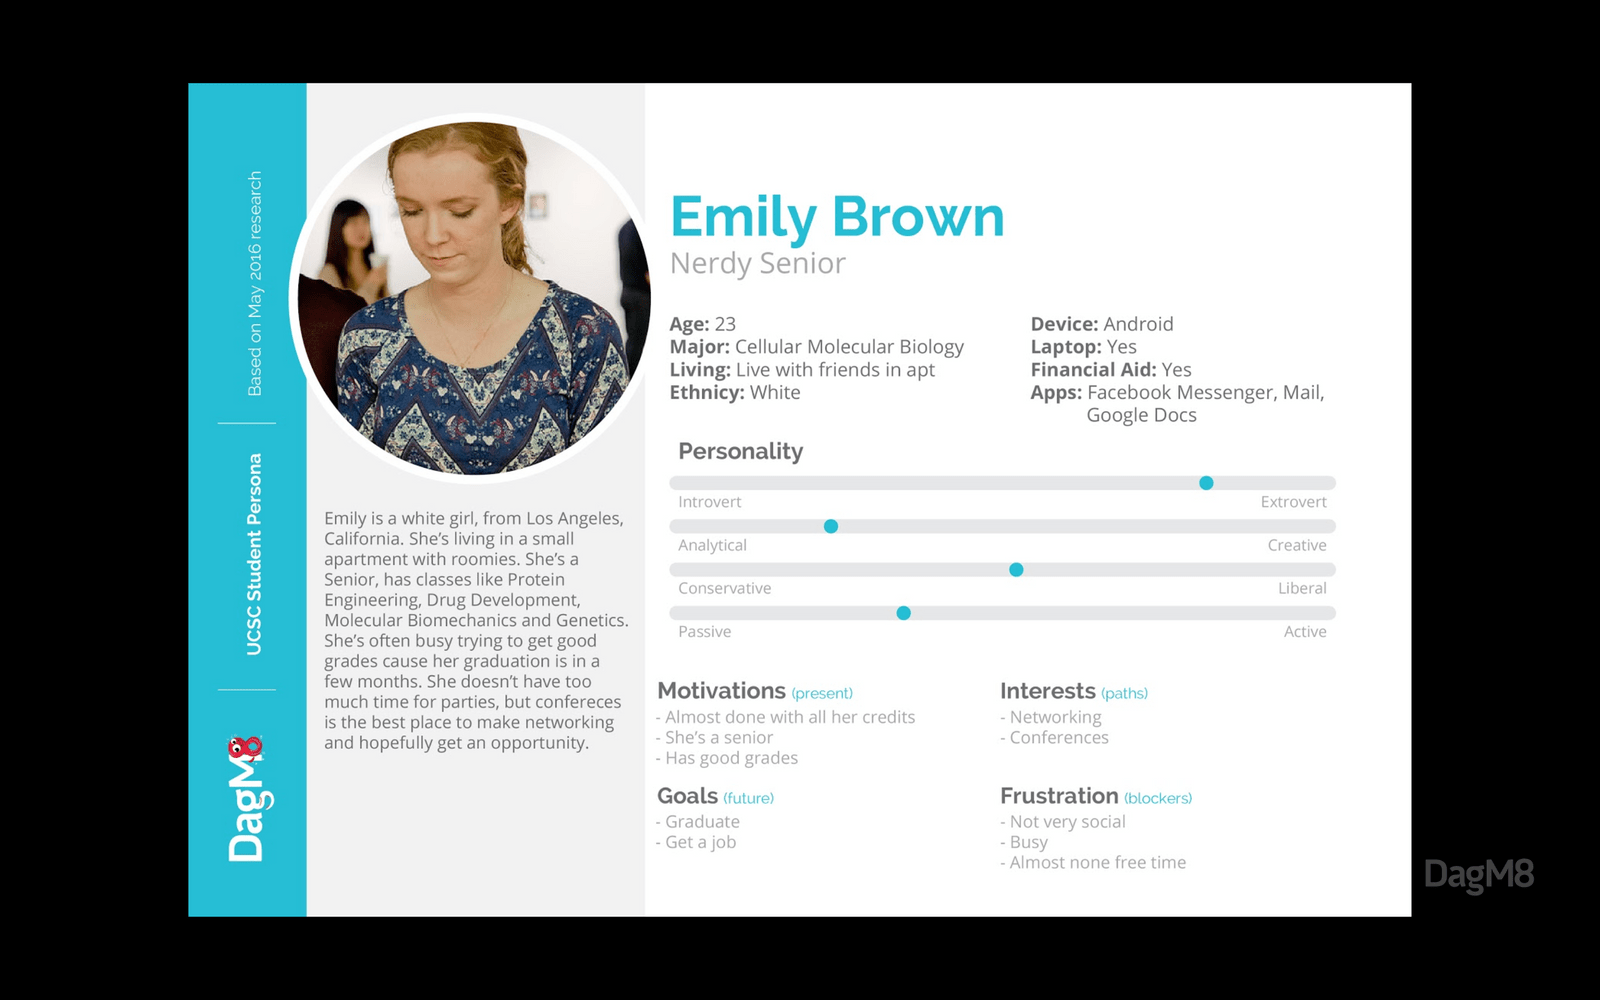 Emily, one of our personas